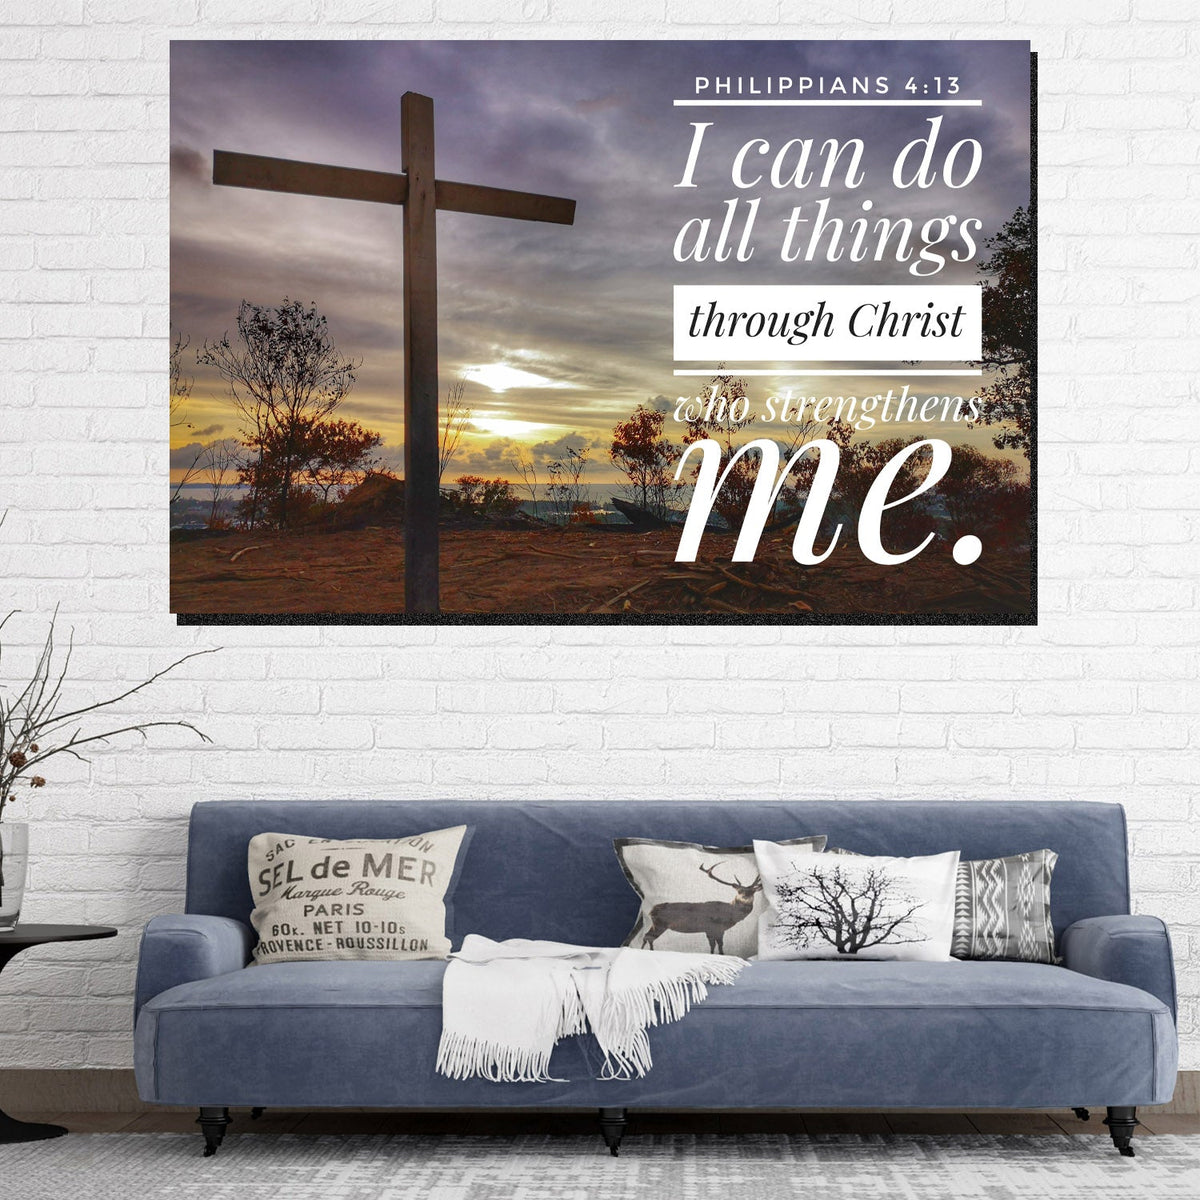 https://cdn.shopify.com/s/files/1/0387/9986/8044/products/BibleQuotePhilippians4_13CanvasArtprintStretched-2.jpg